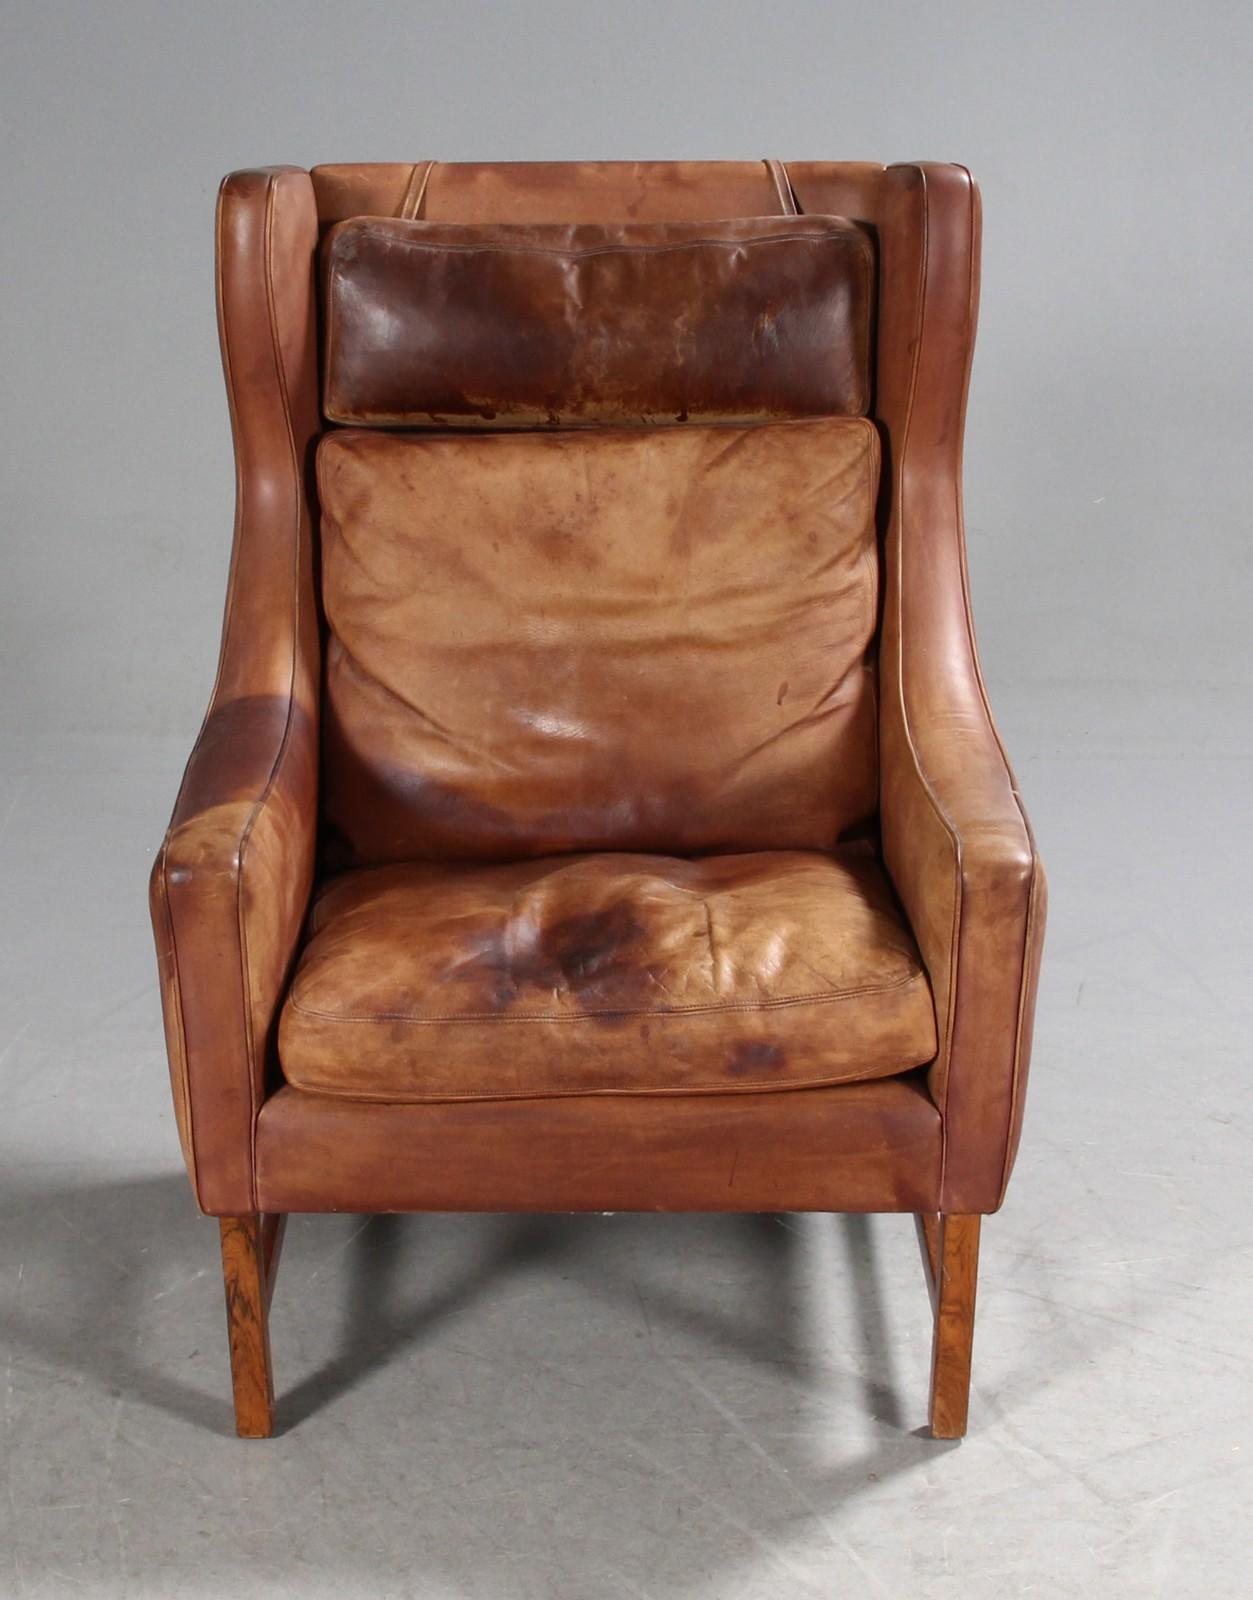 Cognac leather wingback chairs, designed by Fredrik Kayser for Vatne Møbler, Norway, circa 1964. Hardwood legs, and adjustable headrests with weighted straps. 
Used condition.

